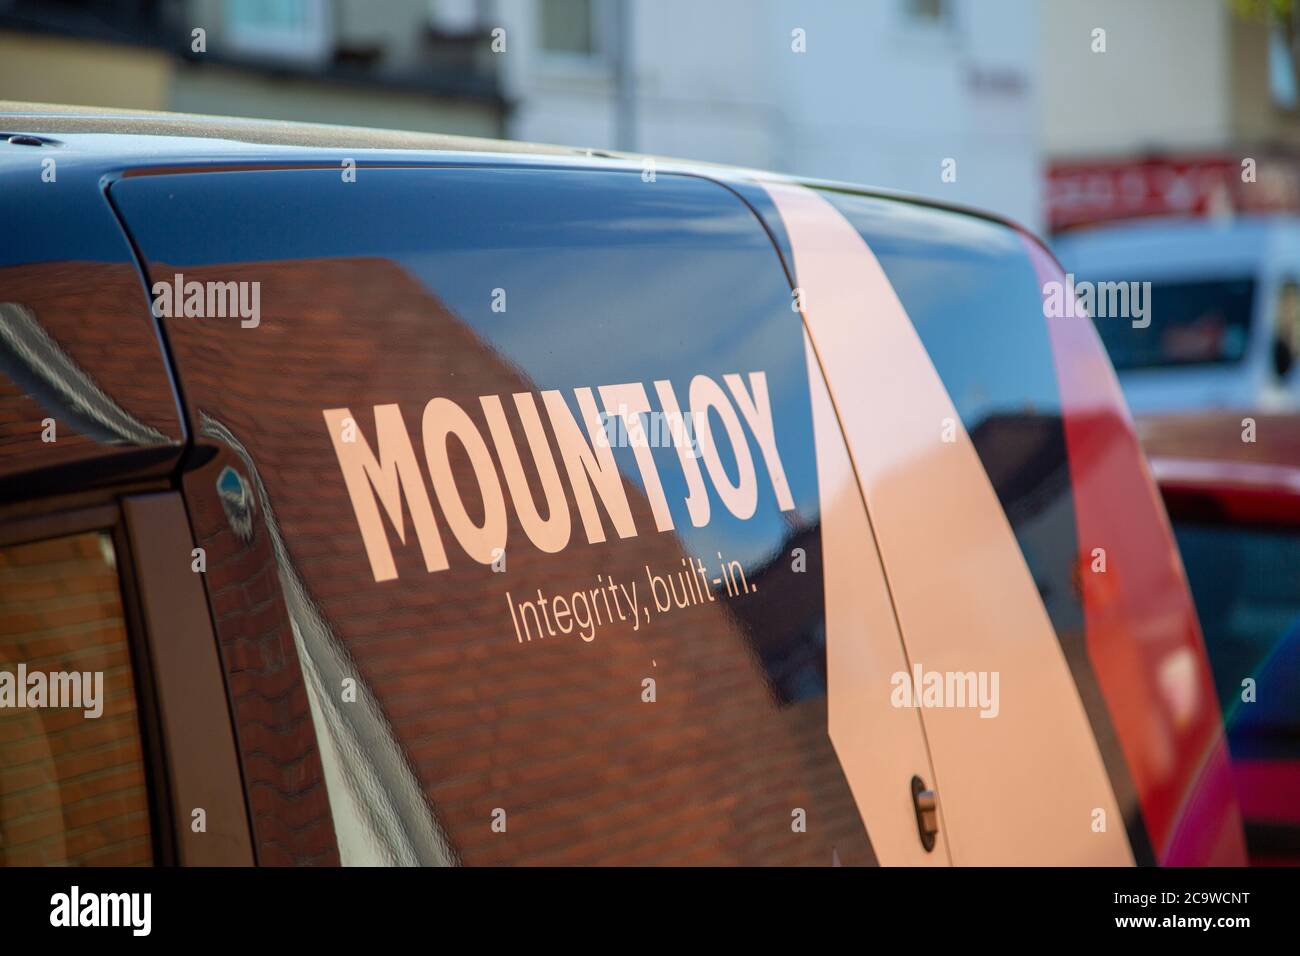 The logo of Mountjoy building services on the side of a van Stock Photo